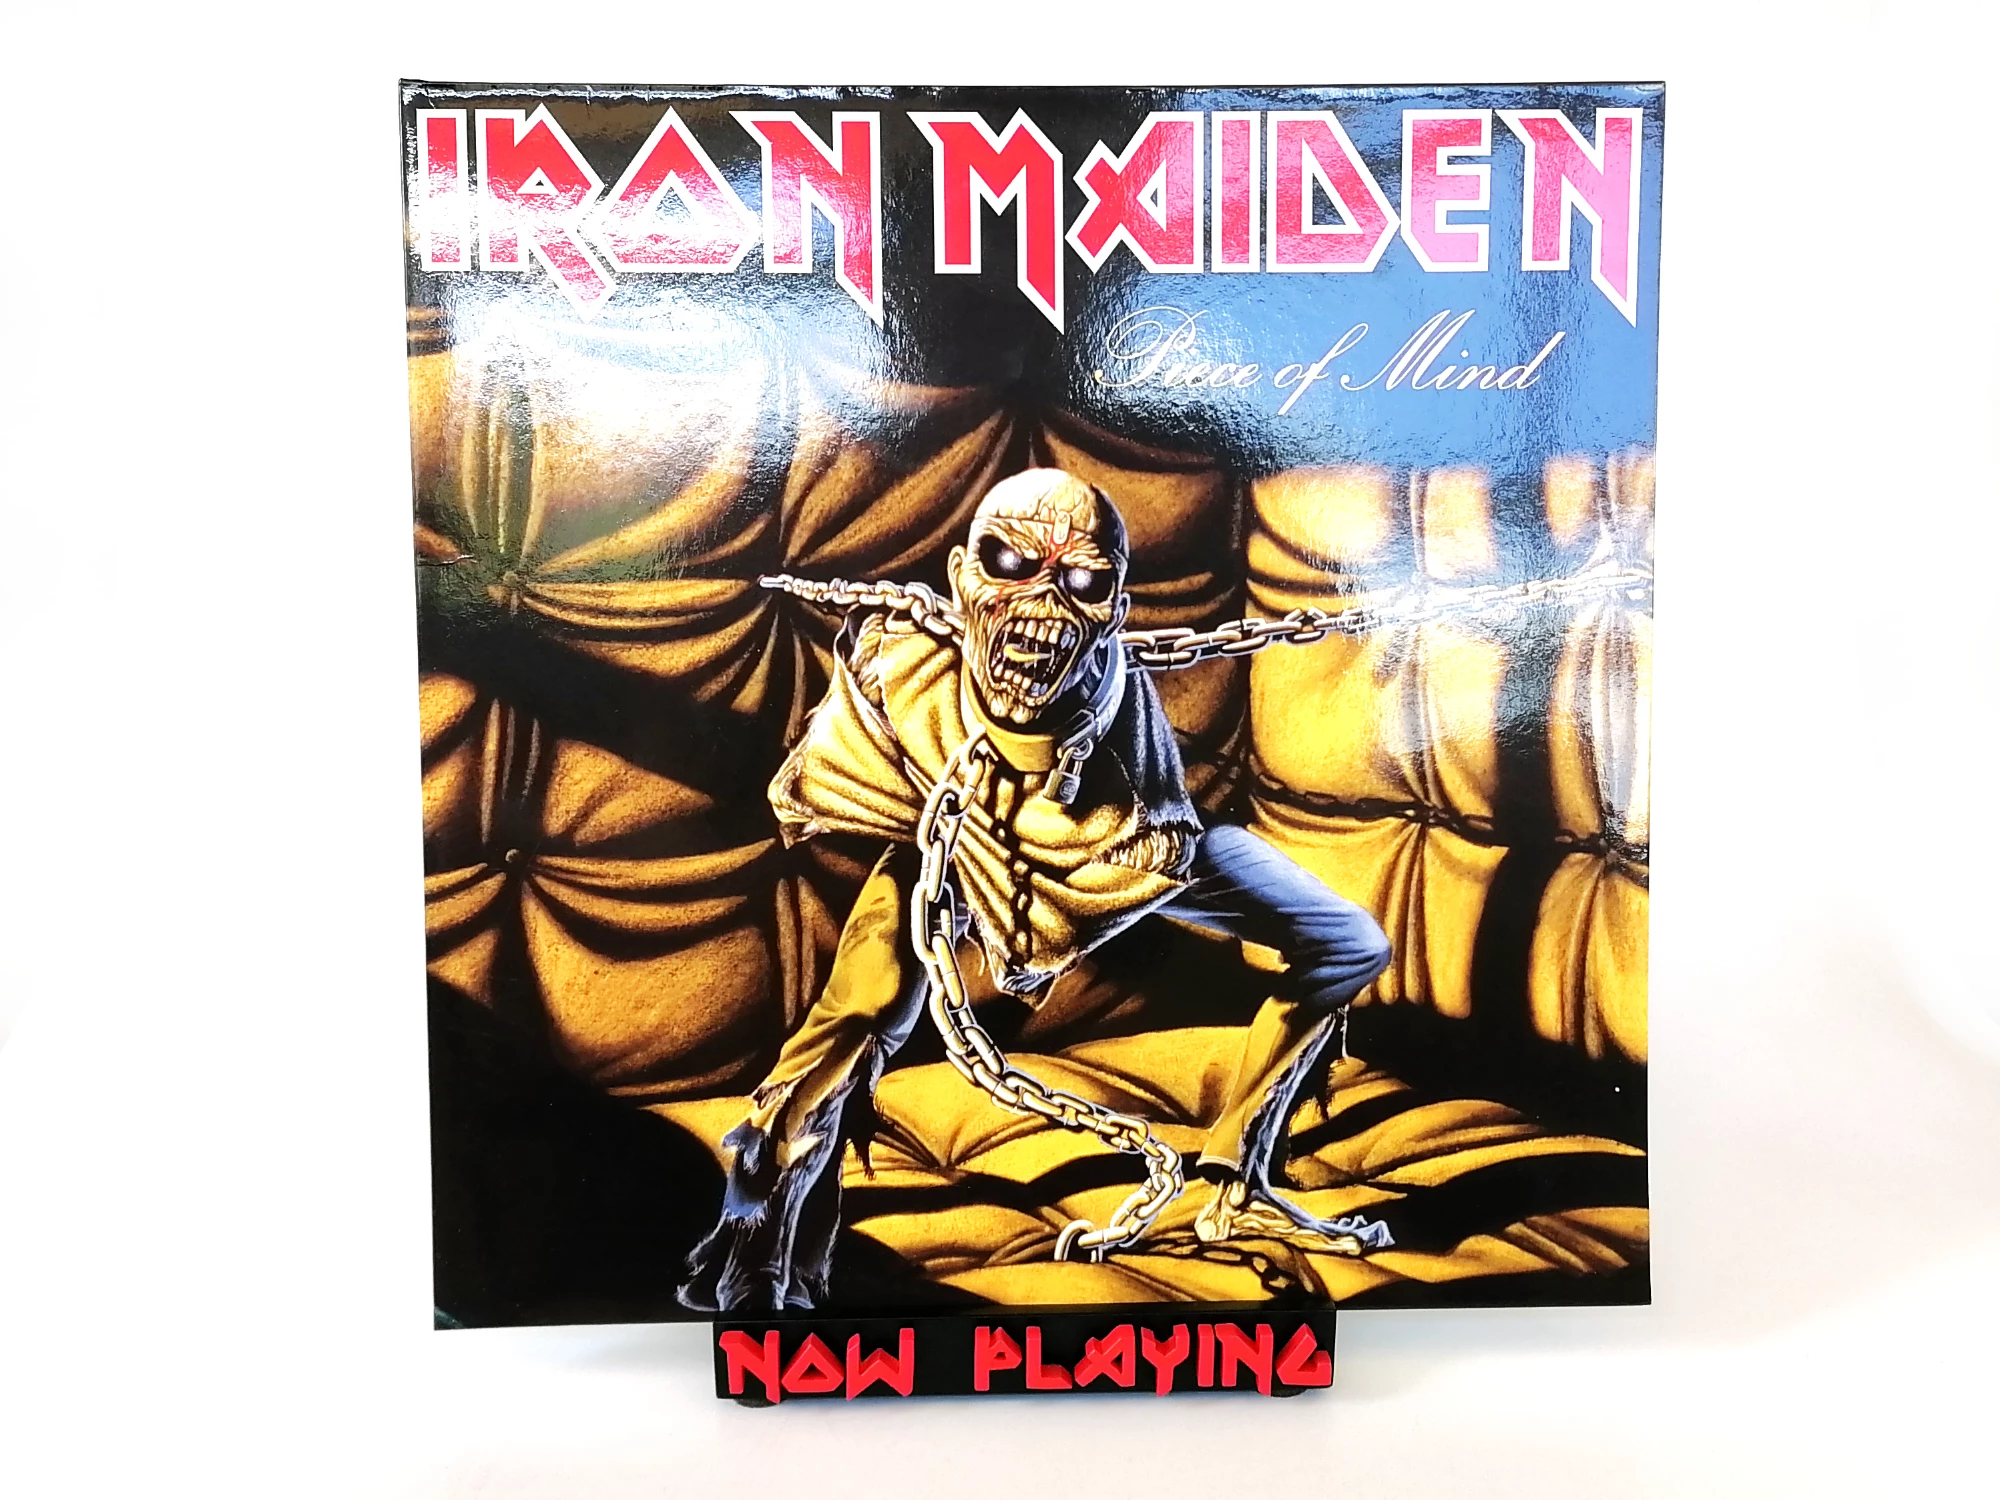 Iron Maiden NOW PLAYING vinyl record display stand